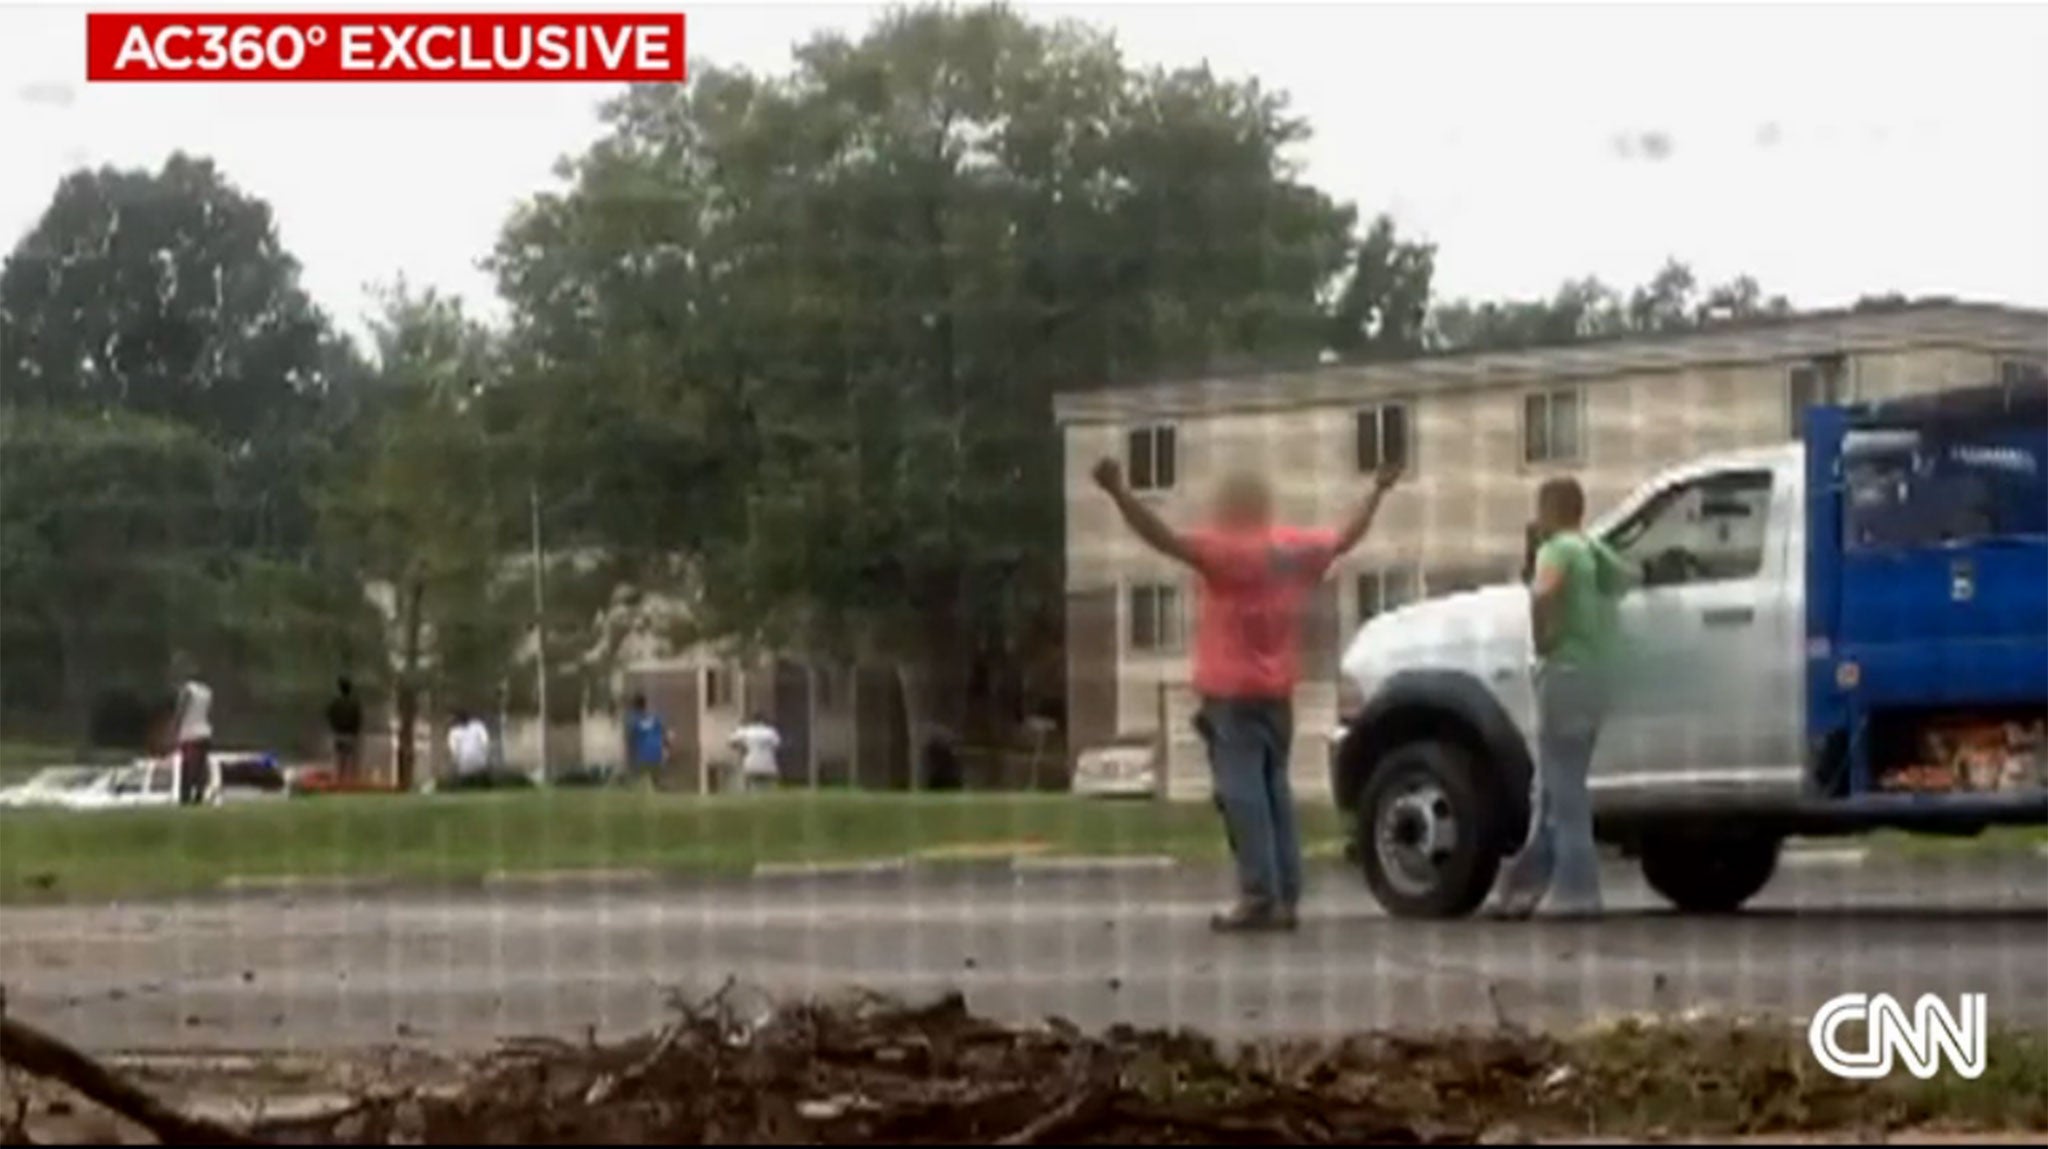 Stills from the footage that appears to show the moments immediately after the shooting of Michael Brown